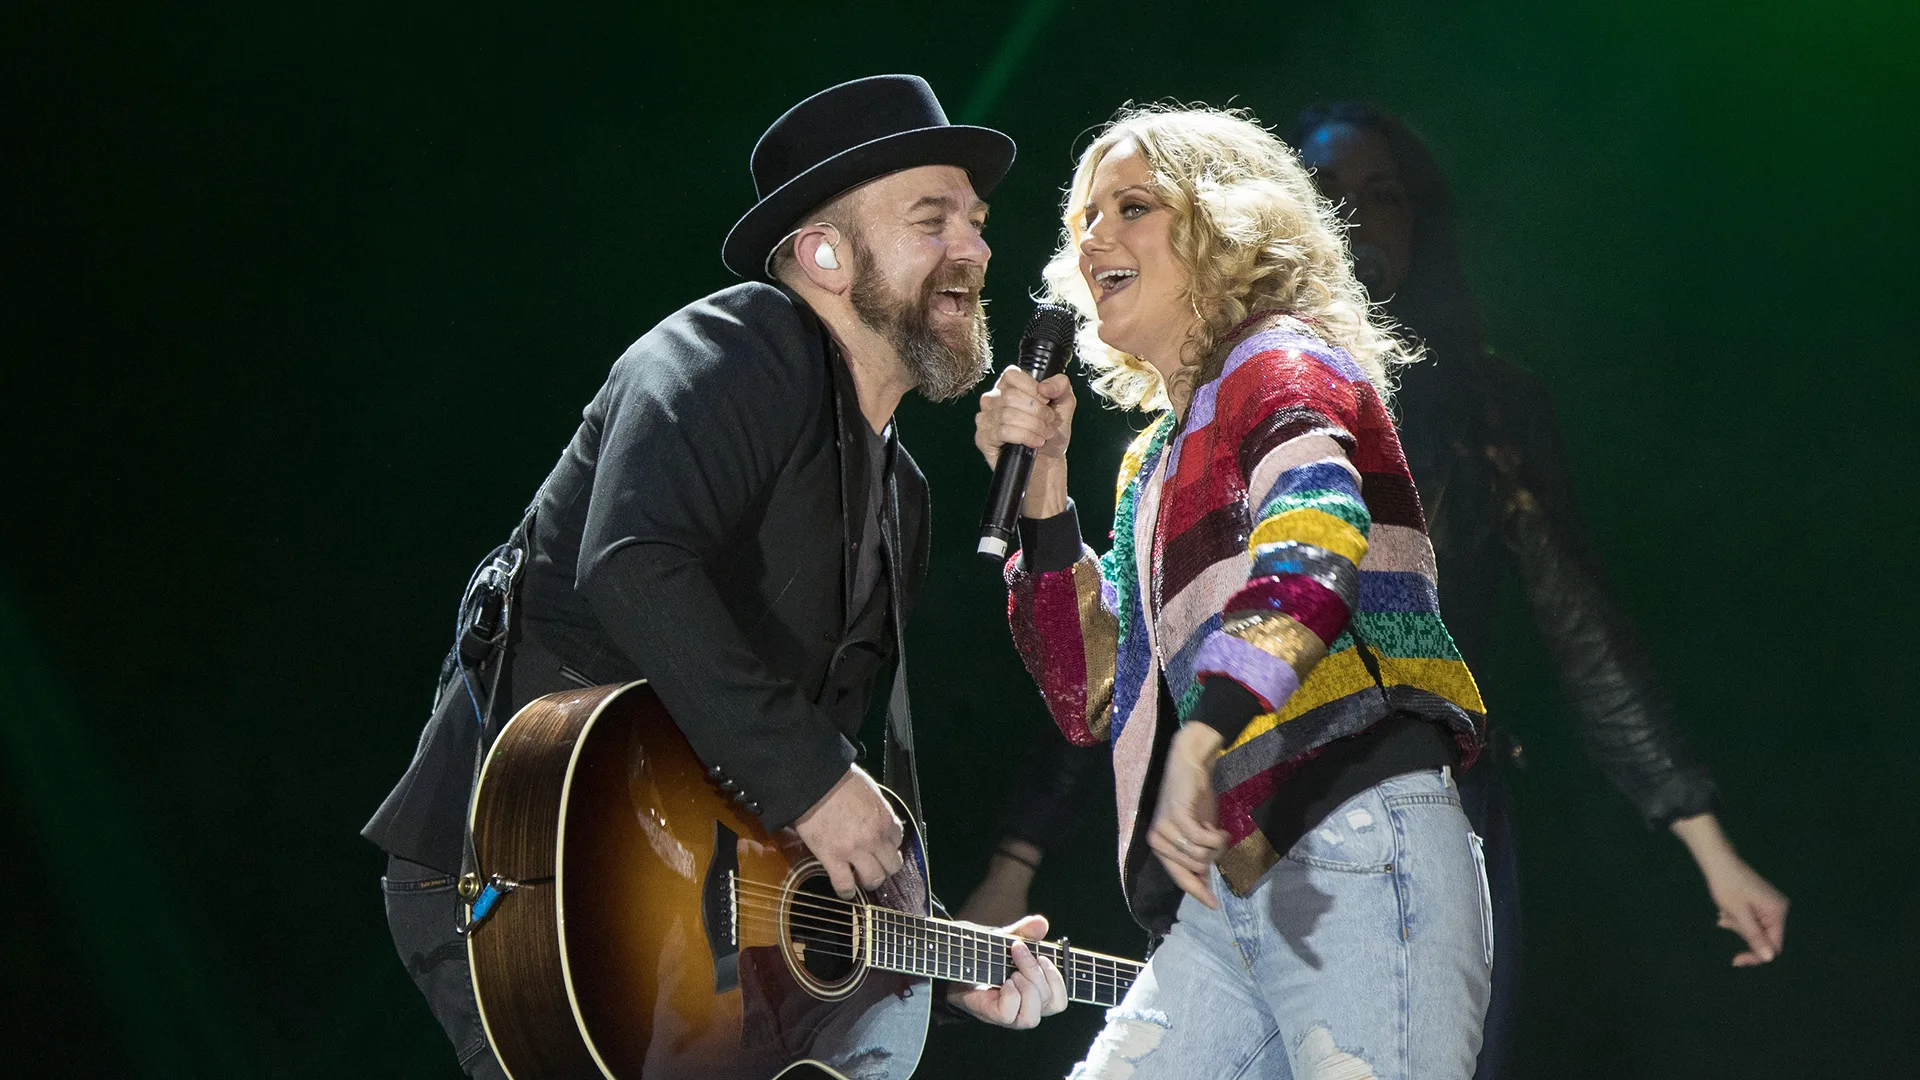 The country music duo Sugarland performing on stage